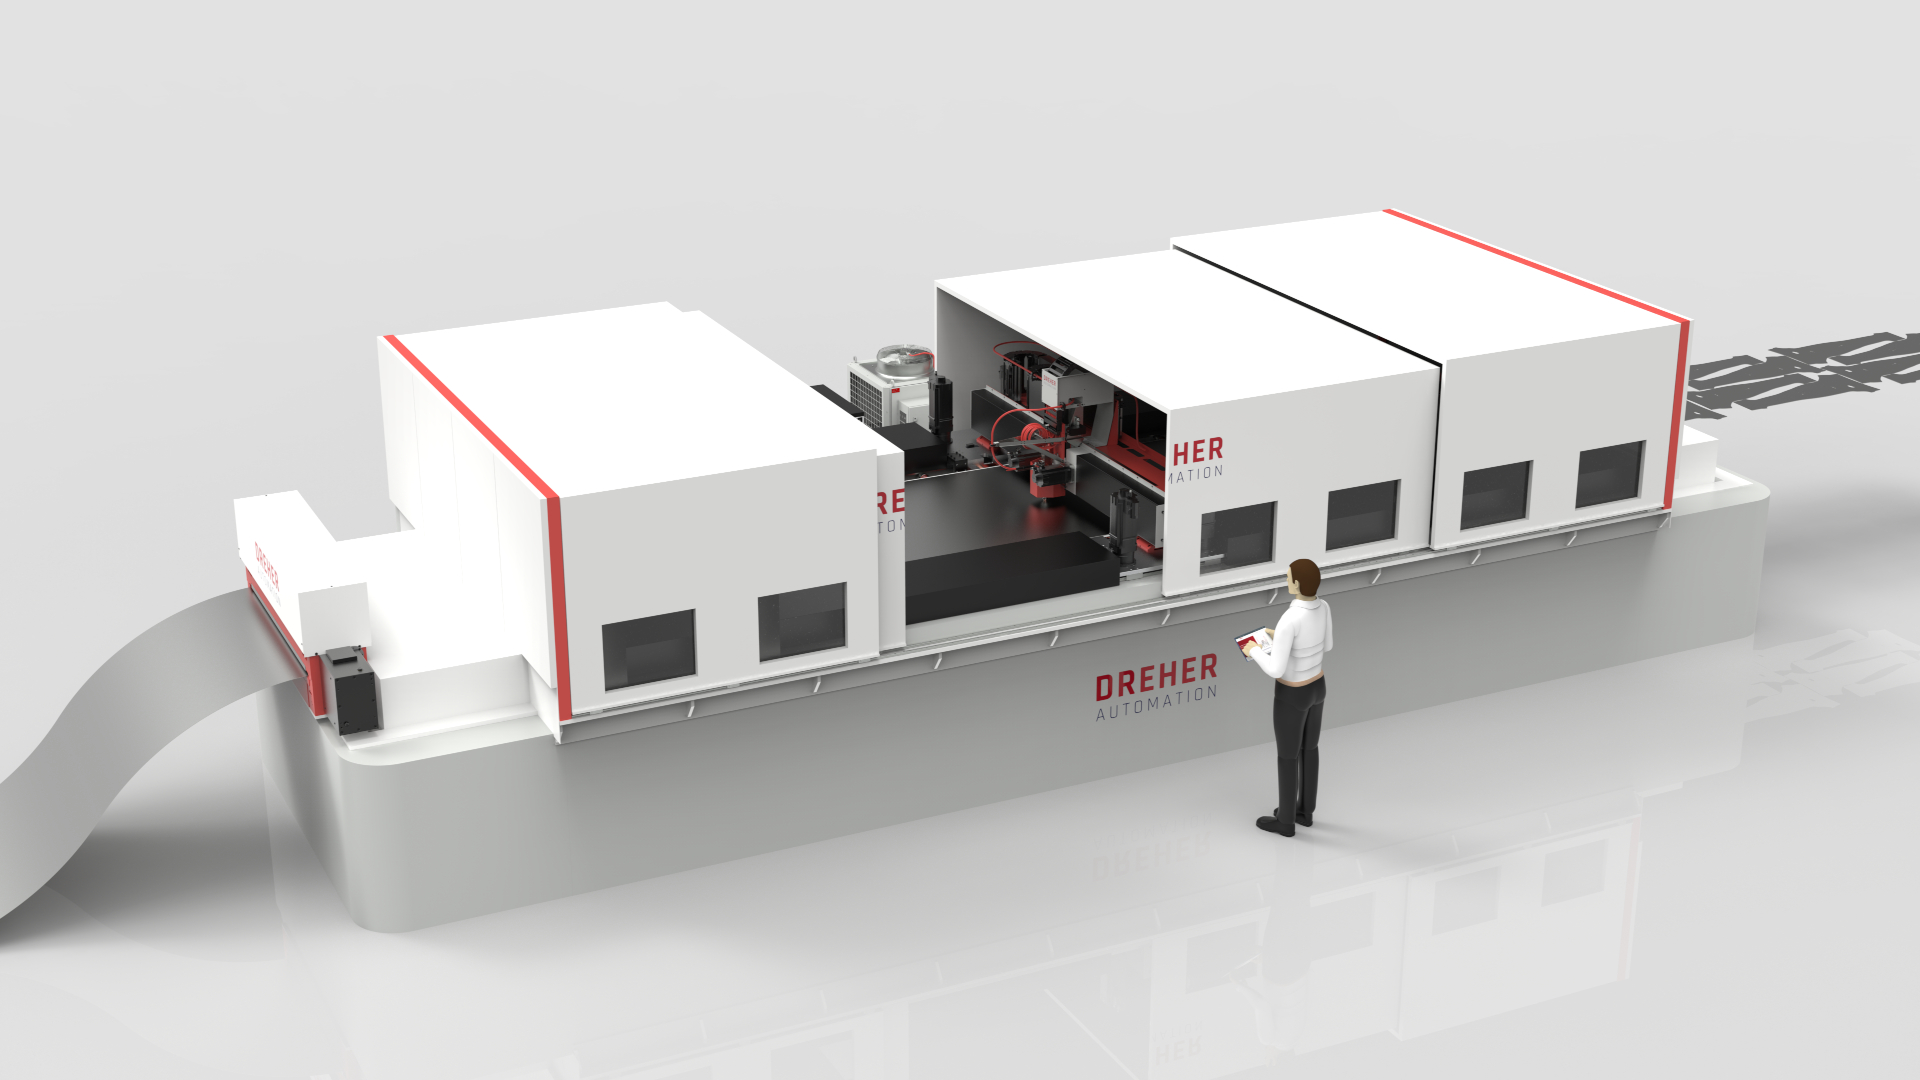 Project DIPOOL: The demonstrator of a laser blanking line from Automatic-Systeme Dreher will use new, intelligent  AI-supported algorithms to monitor the cutting process, adjust it automatically in the event of deviations and thus ensure cutting quality as well as productivity. 